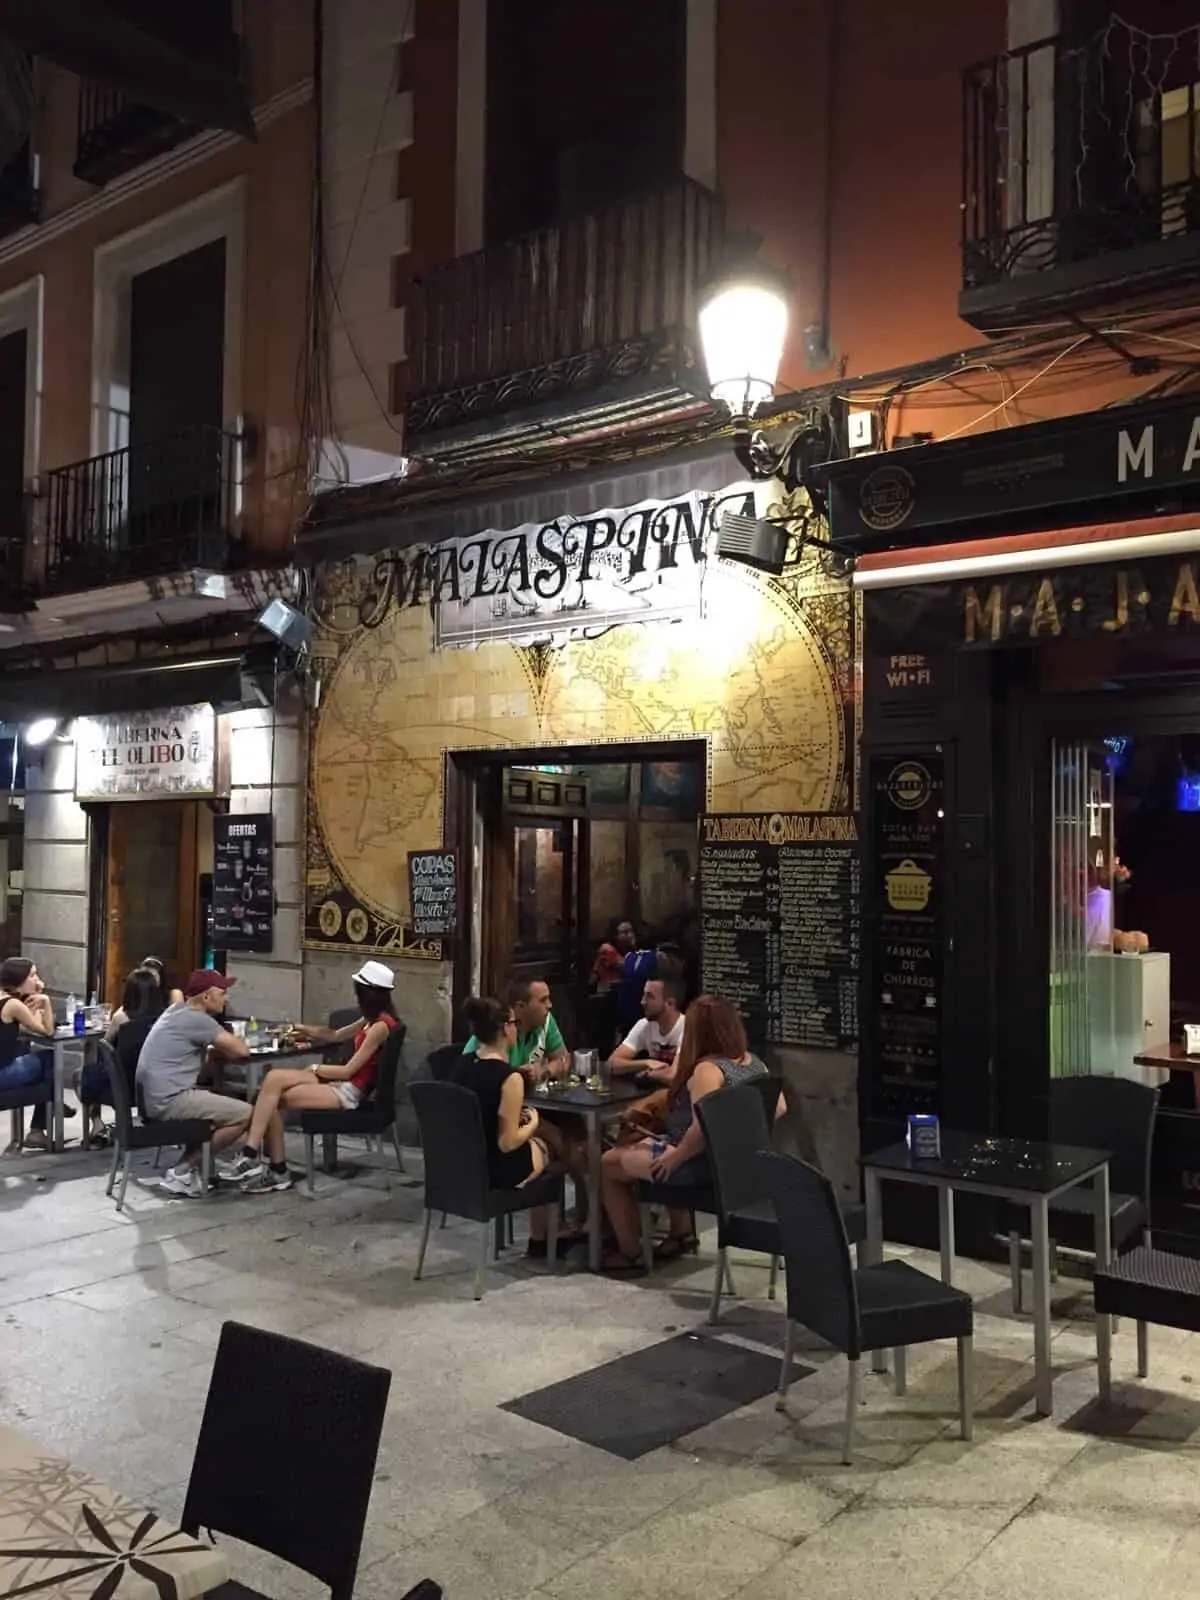 Madrid city guide: Where to eat, drink, shop and stay in the